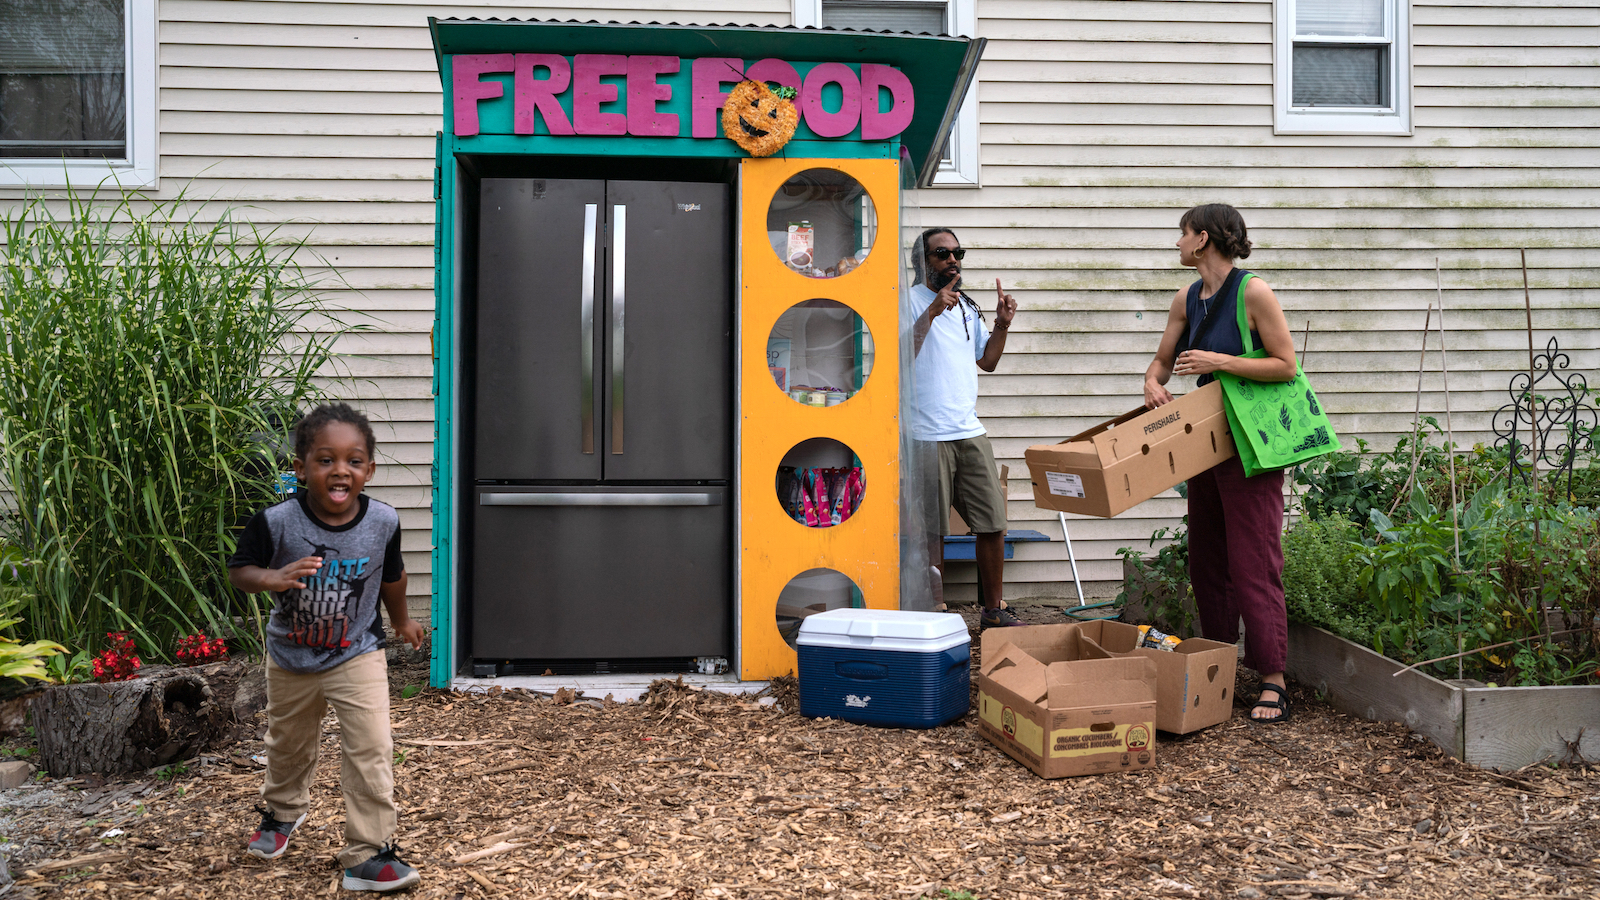 Volunteers help out at a community fridge run by the Love Fridge, a mutual aid group in Chicago